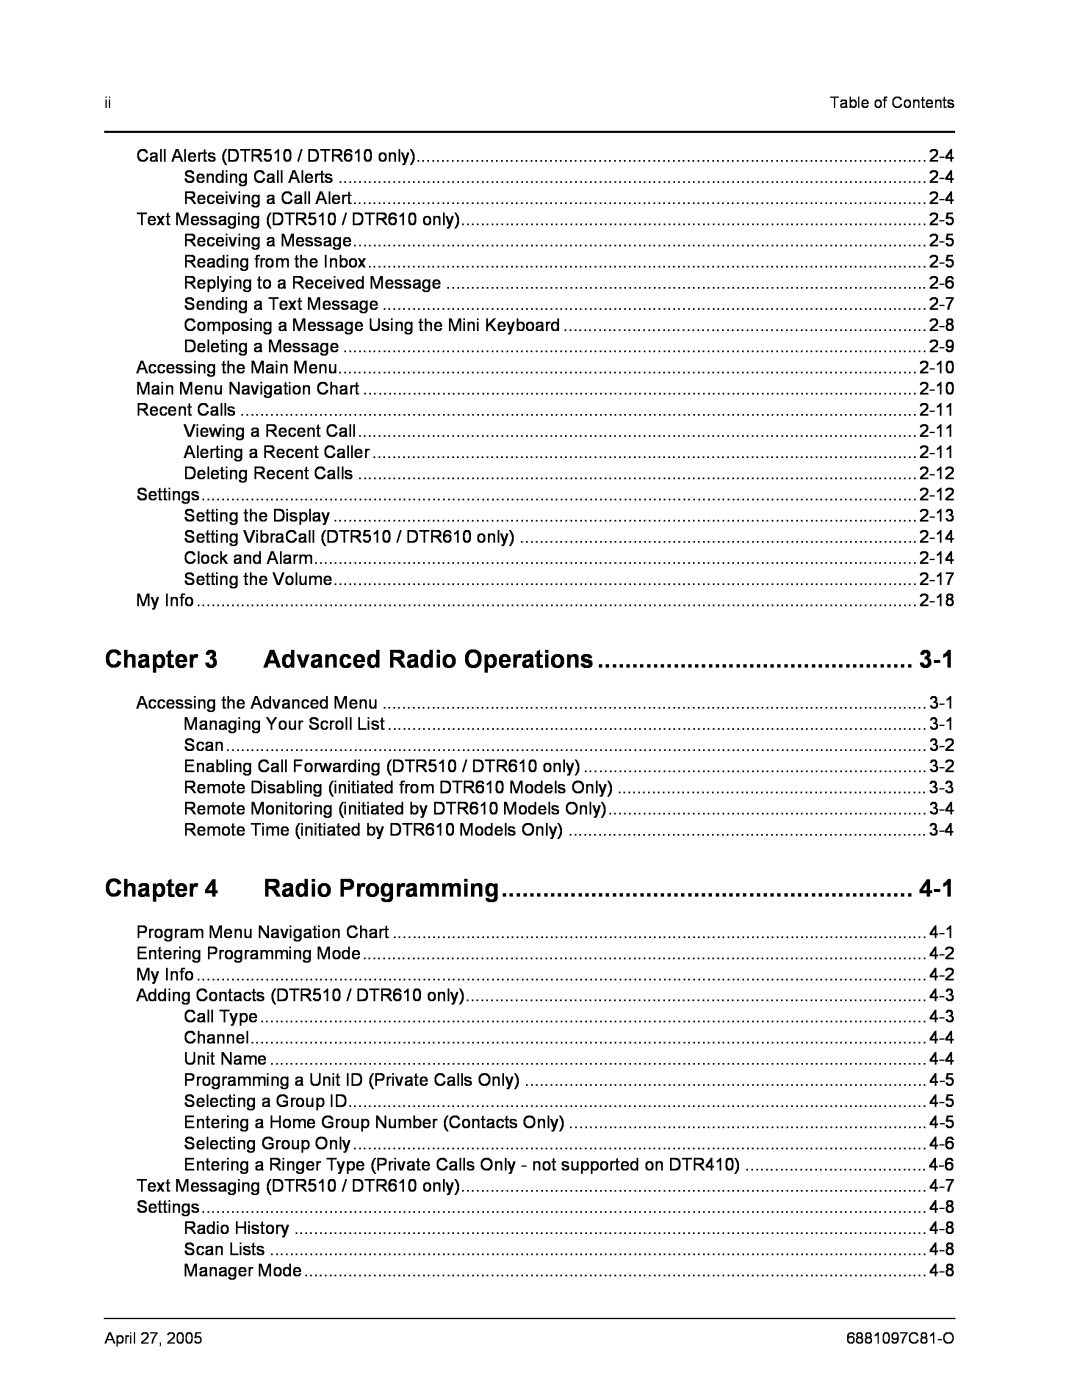 Motorola DTR610, DTR410, DTR510 manual Advanced Radio Operations, Radio Programming, Chapter, Table of Contents, 6881097C81-O 